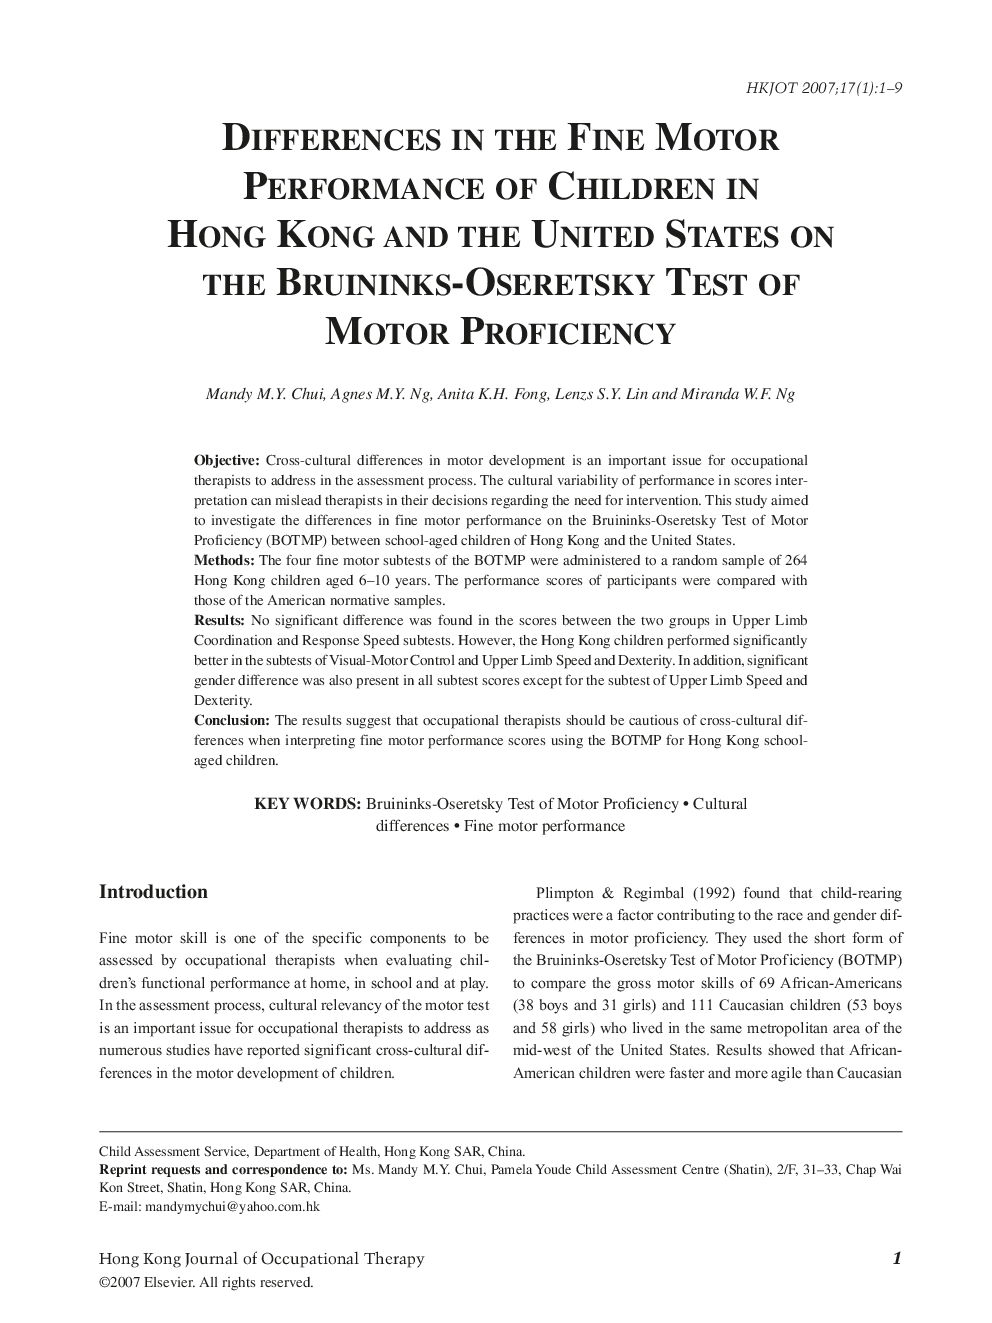 Differences in the Fine Motor Performance of Children in Hong Kong and the United States on the Bruininks-Oseretsky Test of Motor Proficiency